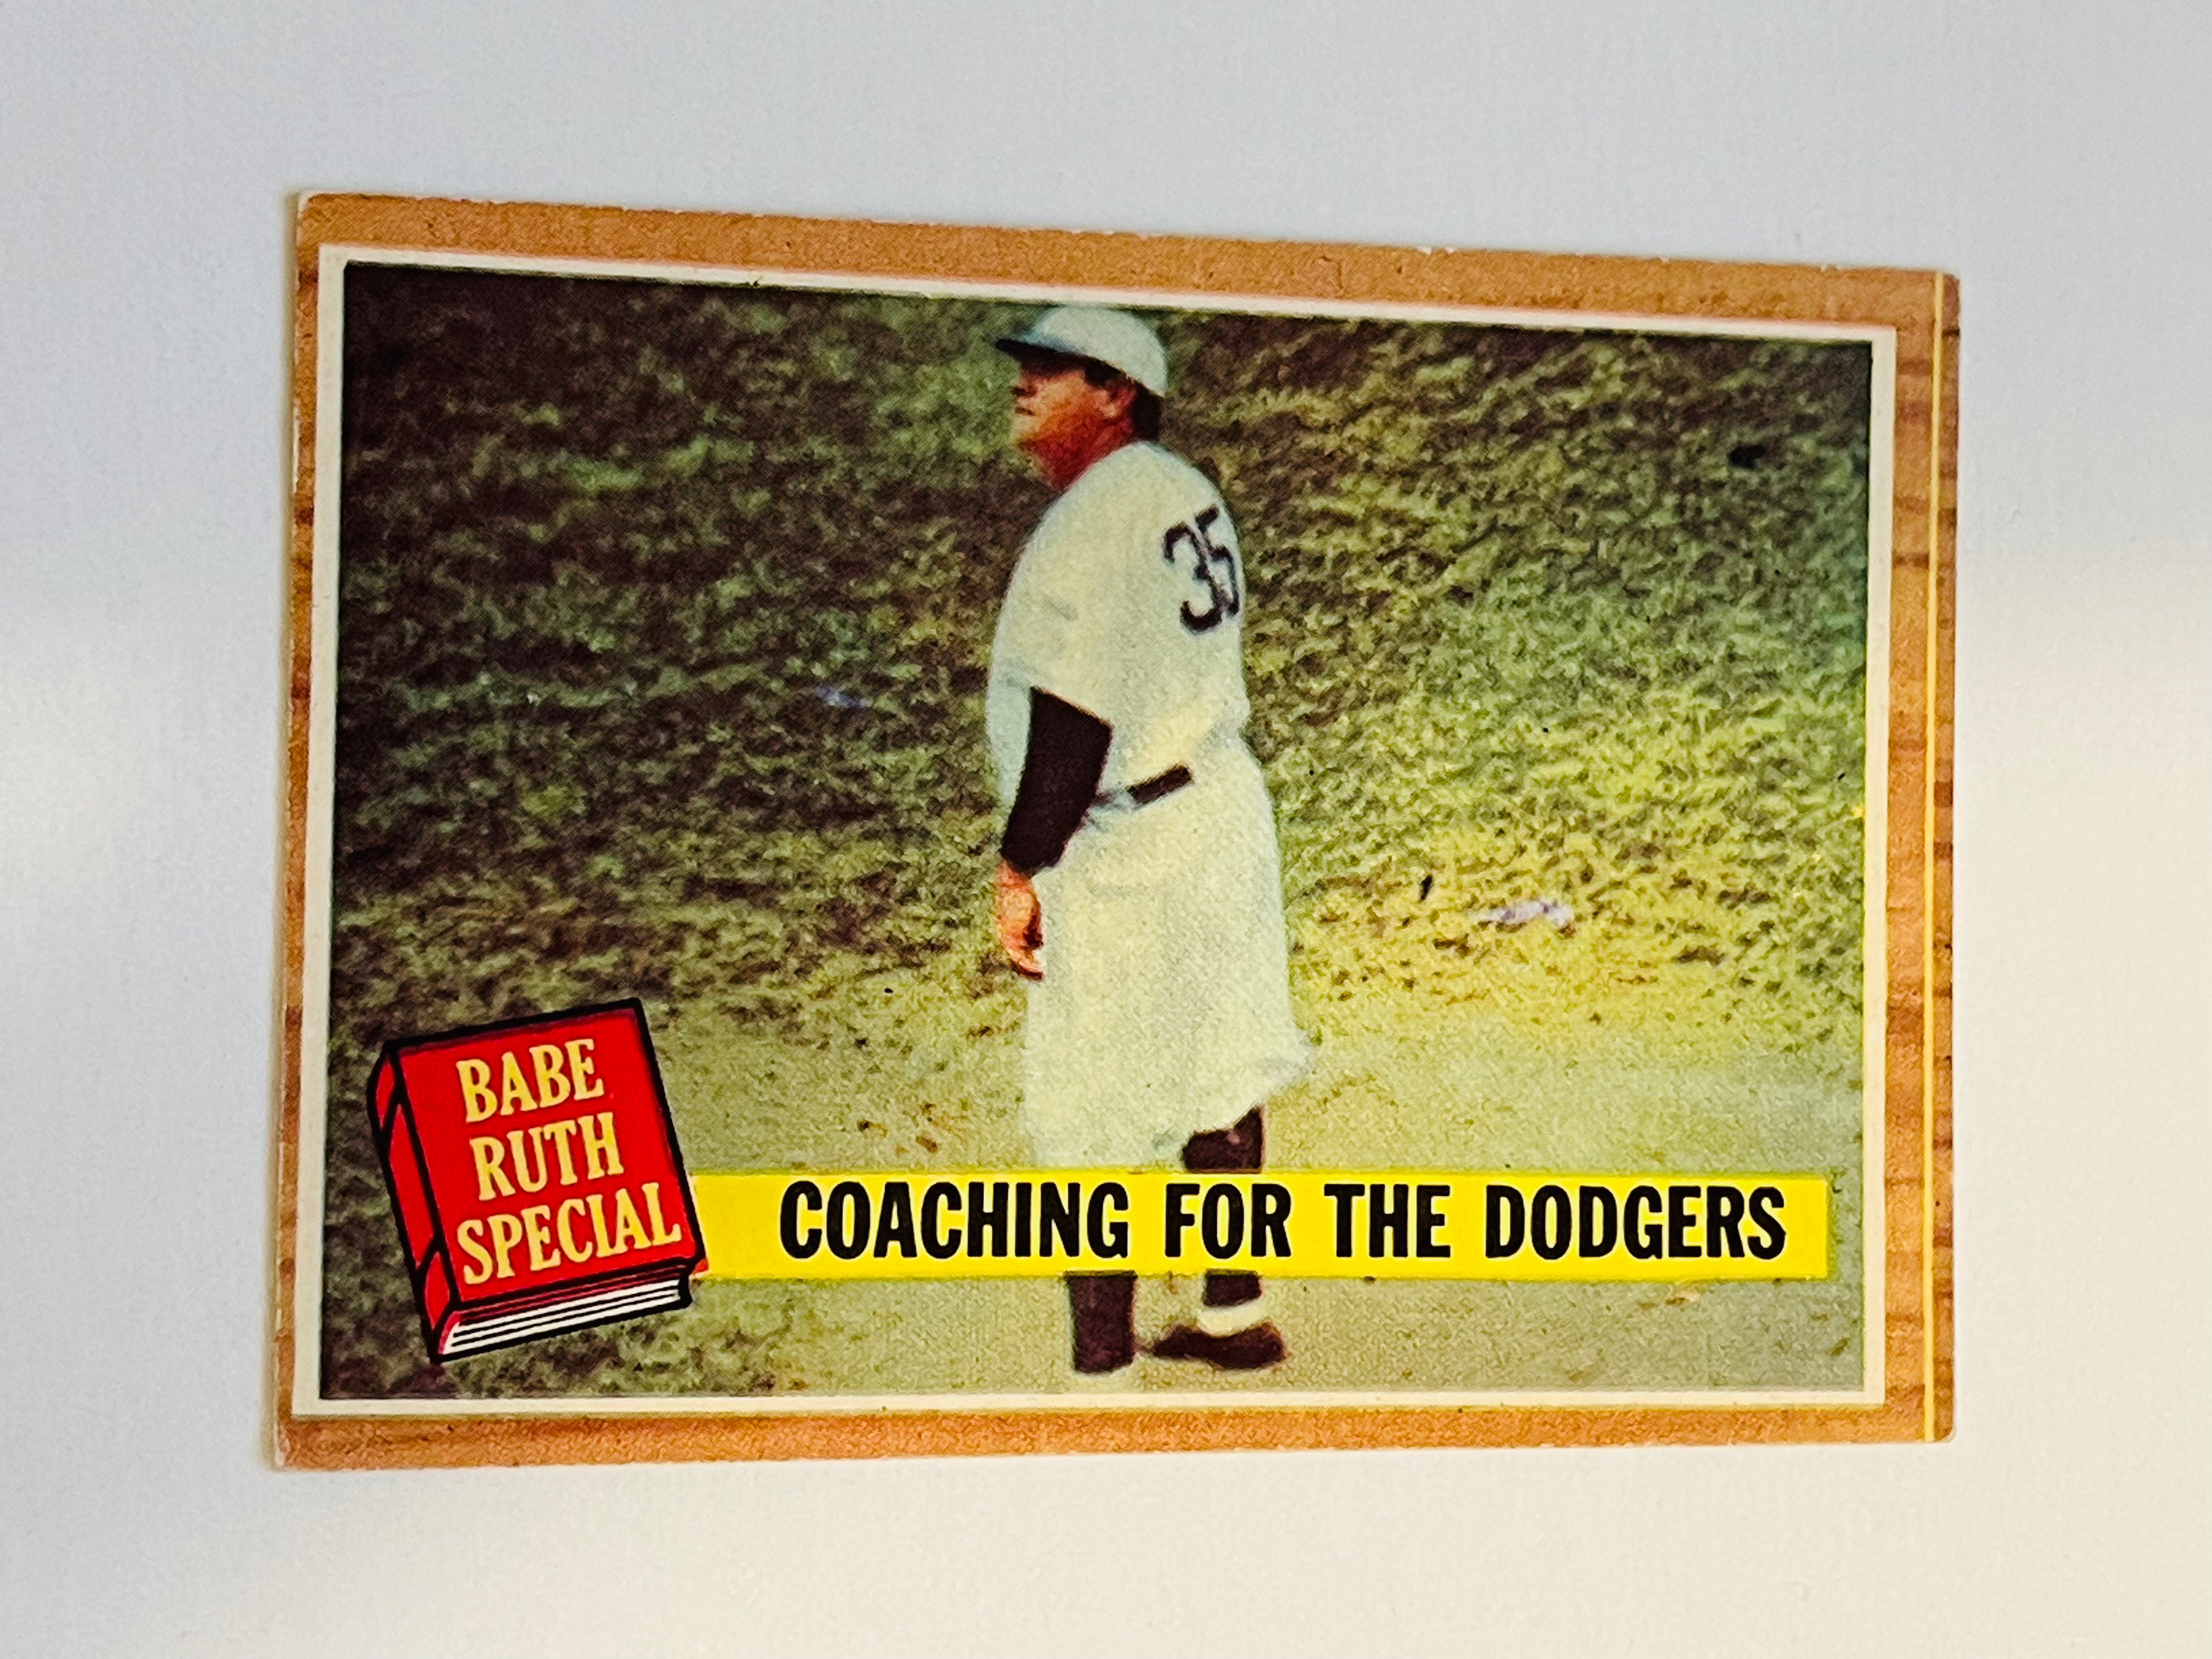 Babe Ruth Coaching for the Dodgers Topps baseball card 1960